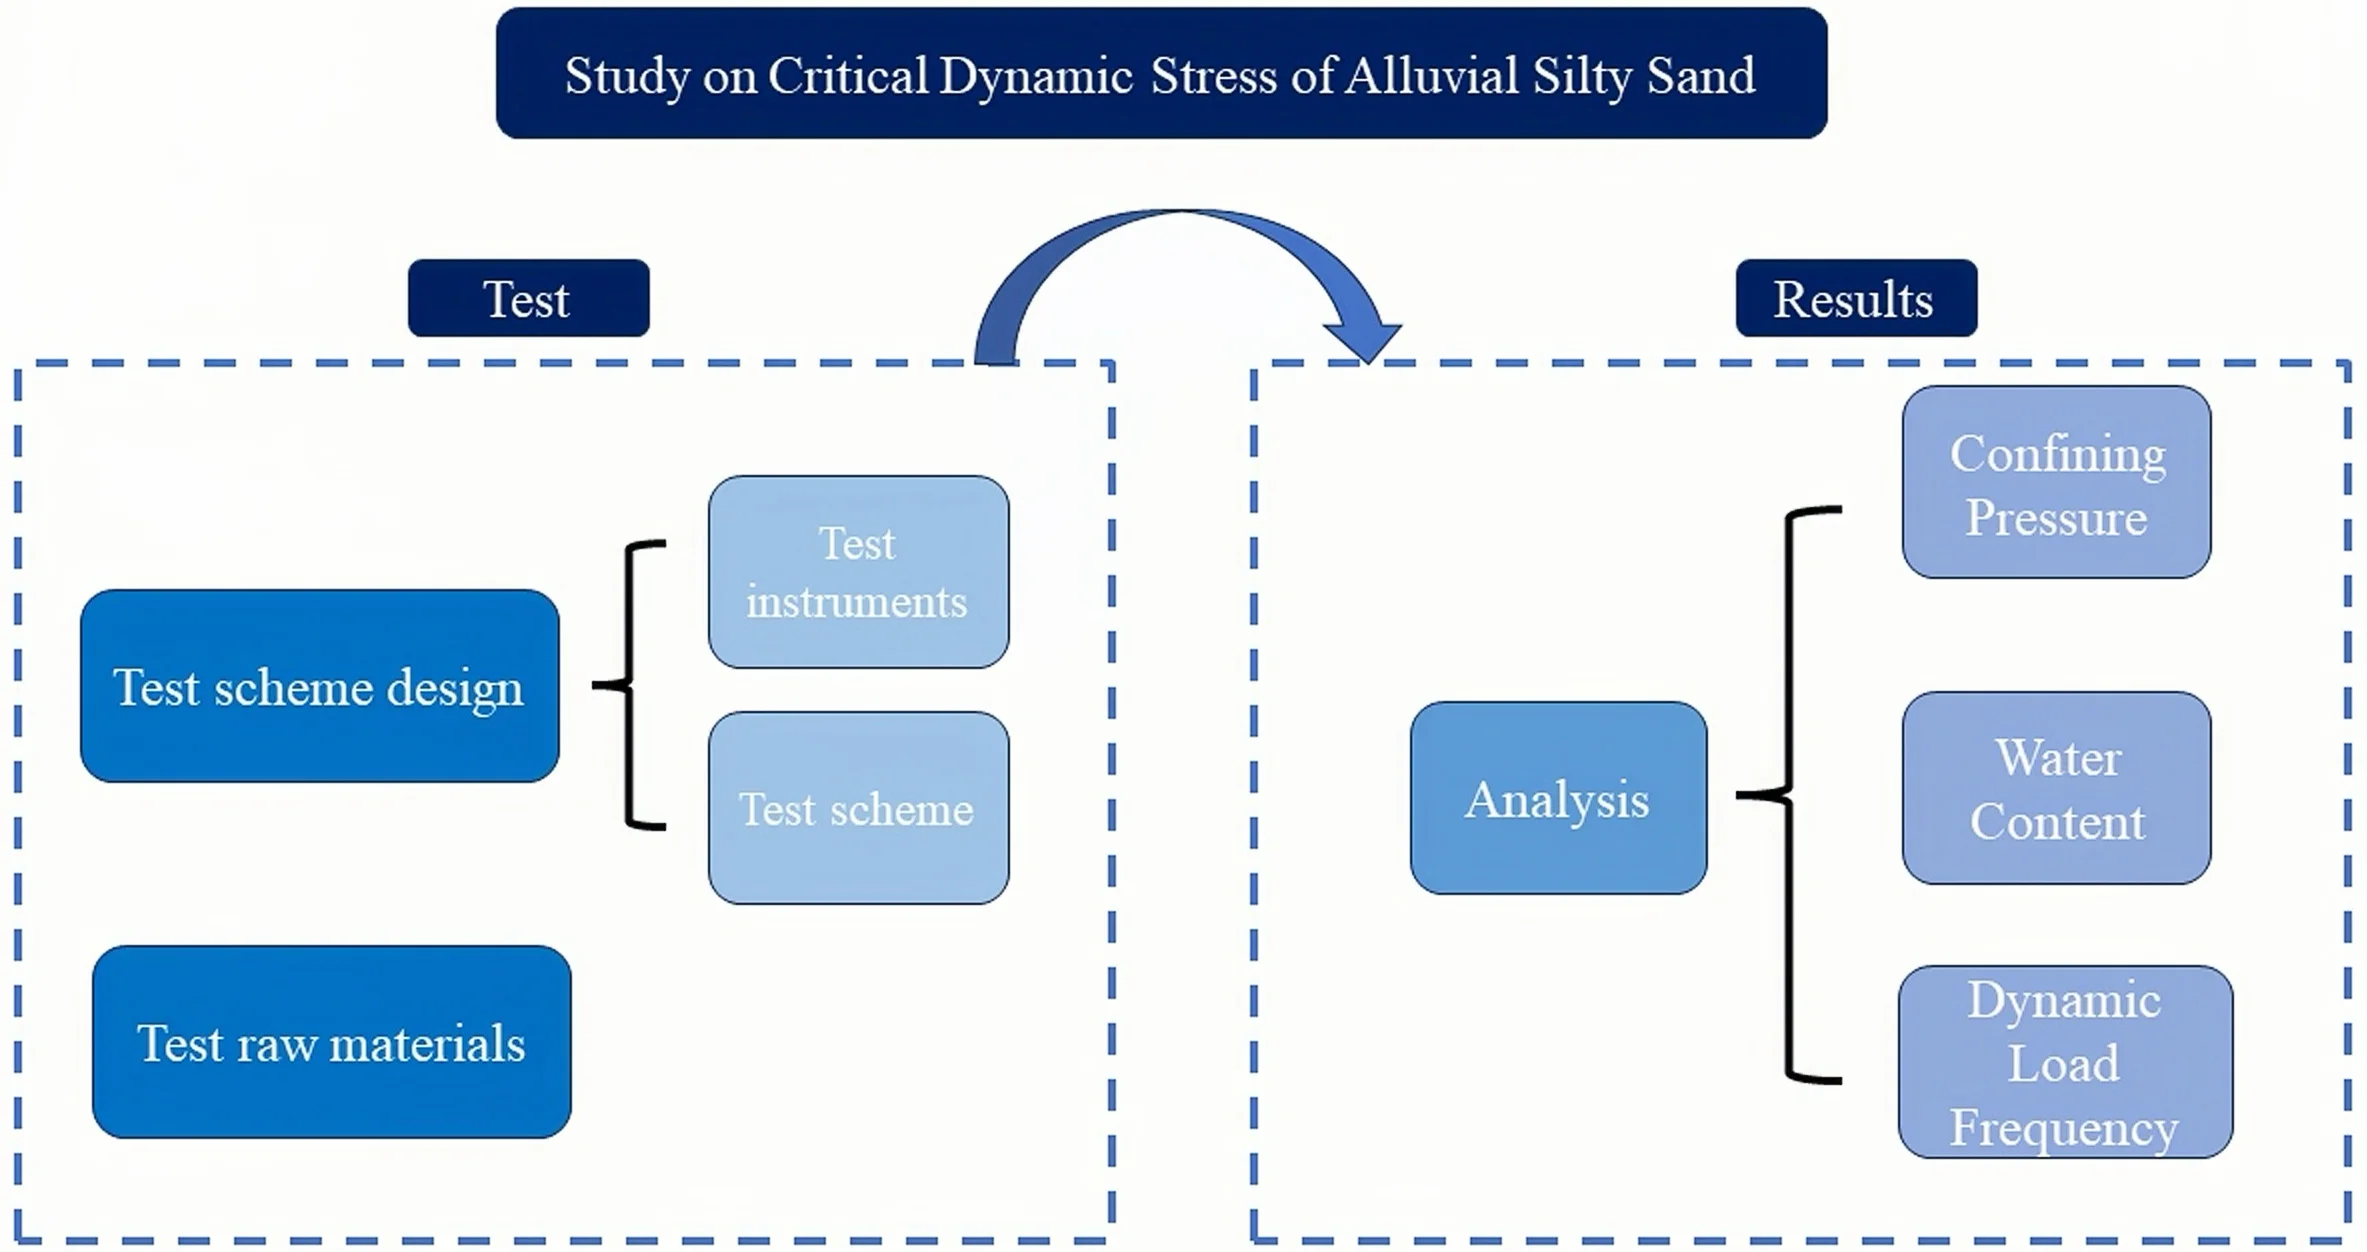 Study on critical dynamic stress of alluvial silty sand under different confining pressure, water content and dynamic load frequency